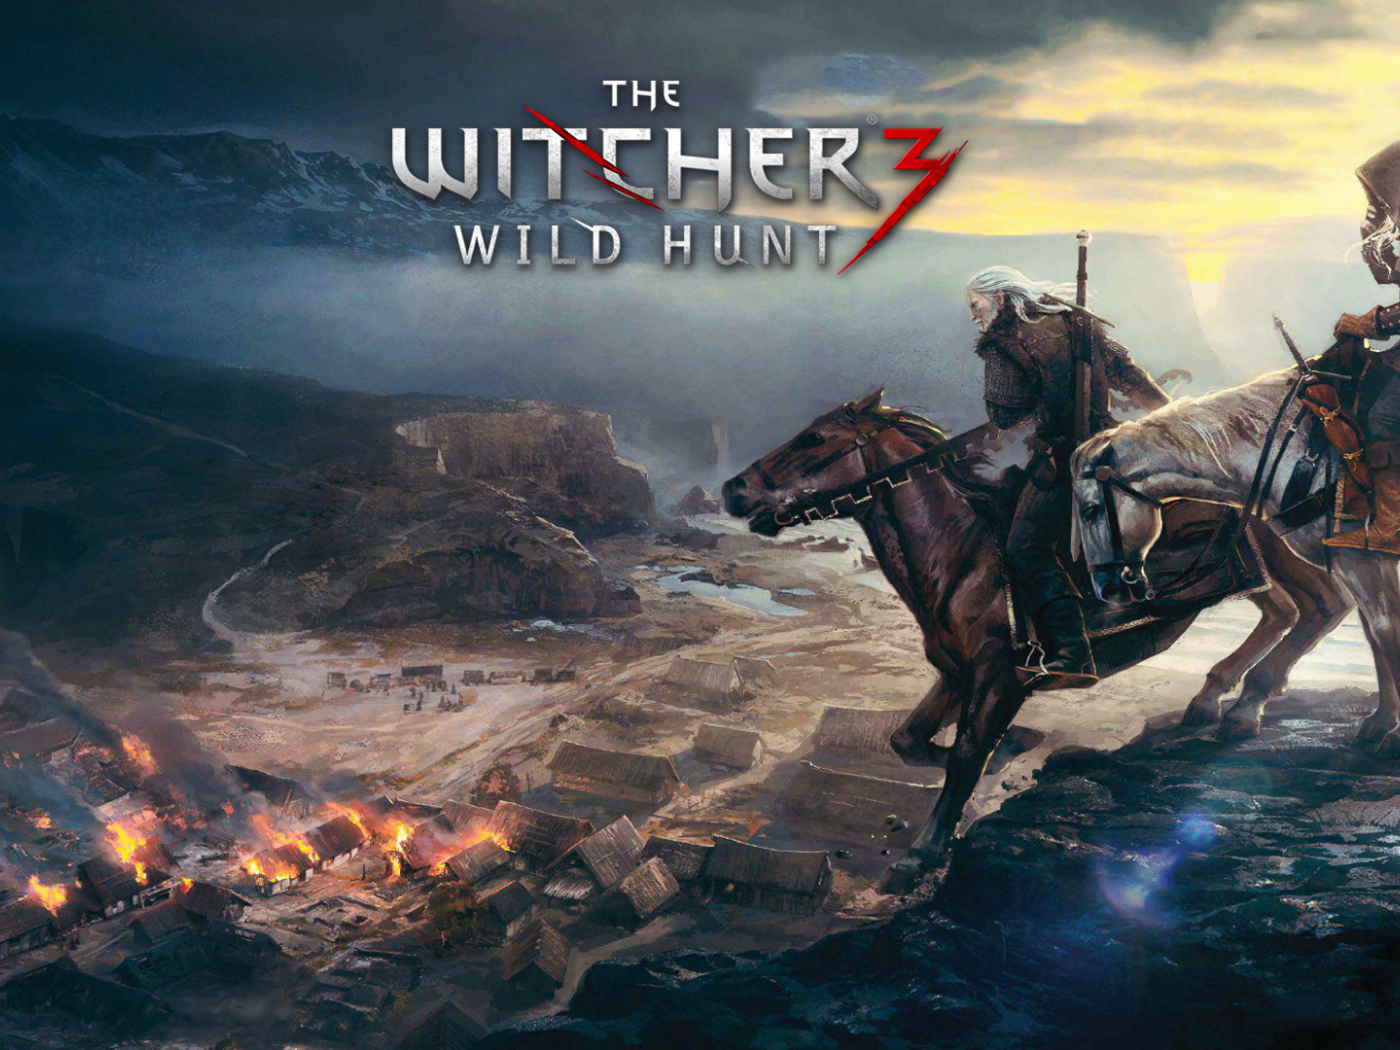 The Witcher 3: Wild Hunt: the thrill of the hunt